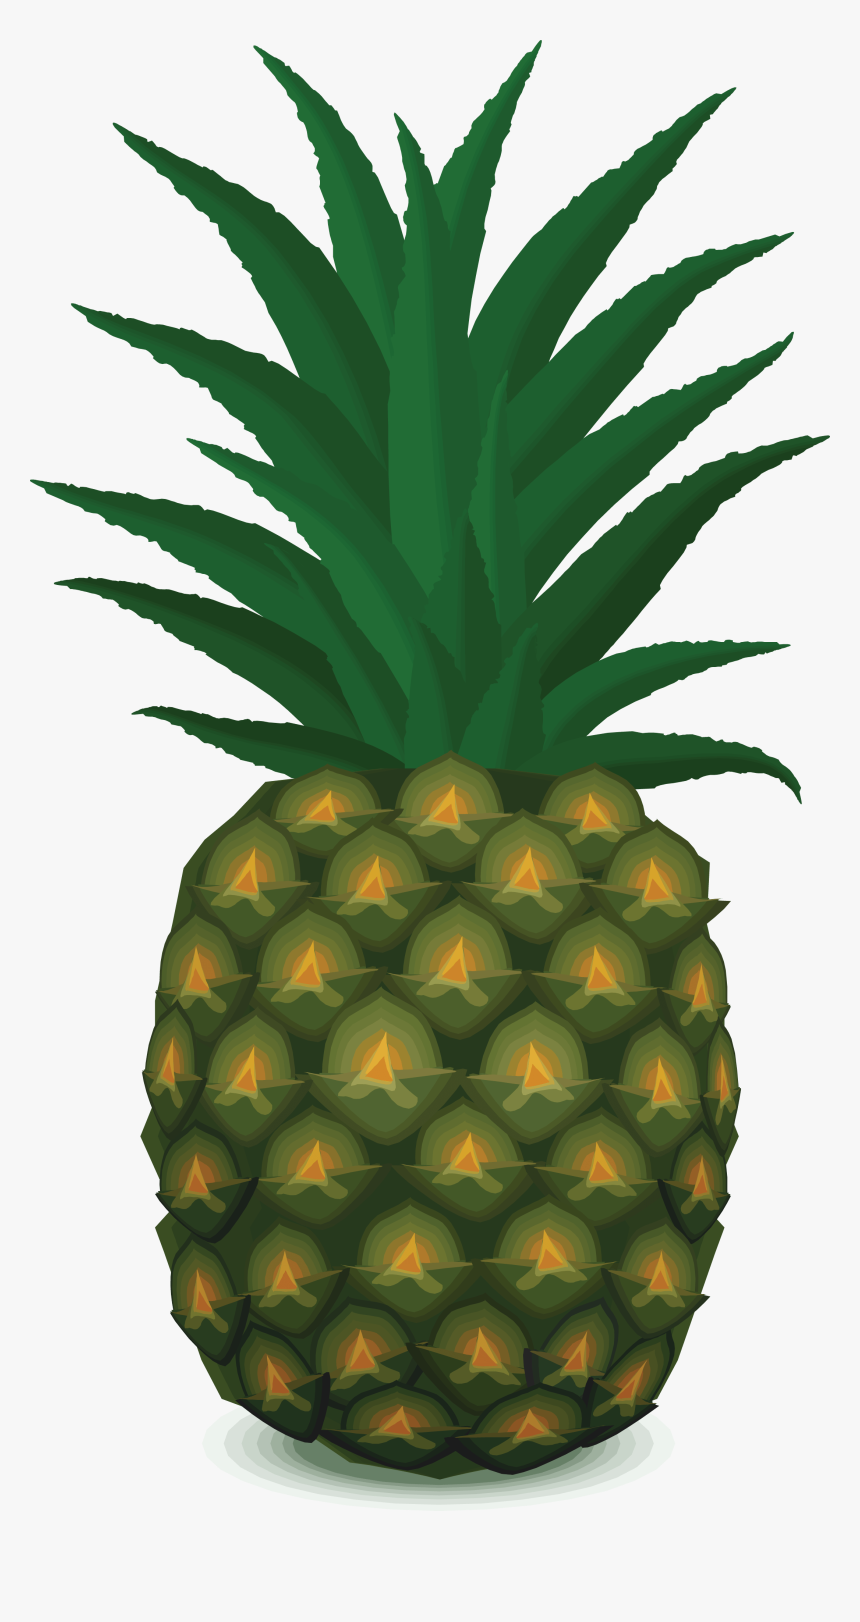 Pineapple Png Download Image - Keep Calm And Eat Pineapple, Transparent Png, Free Download